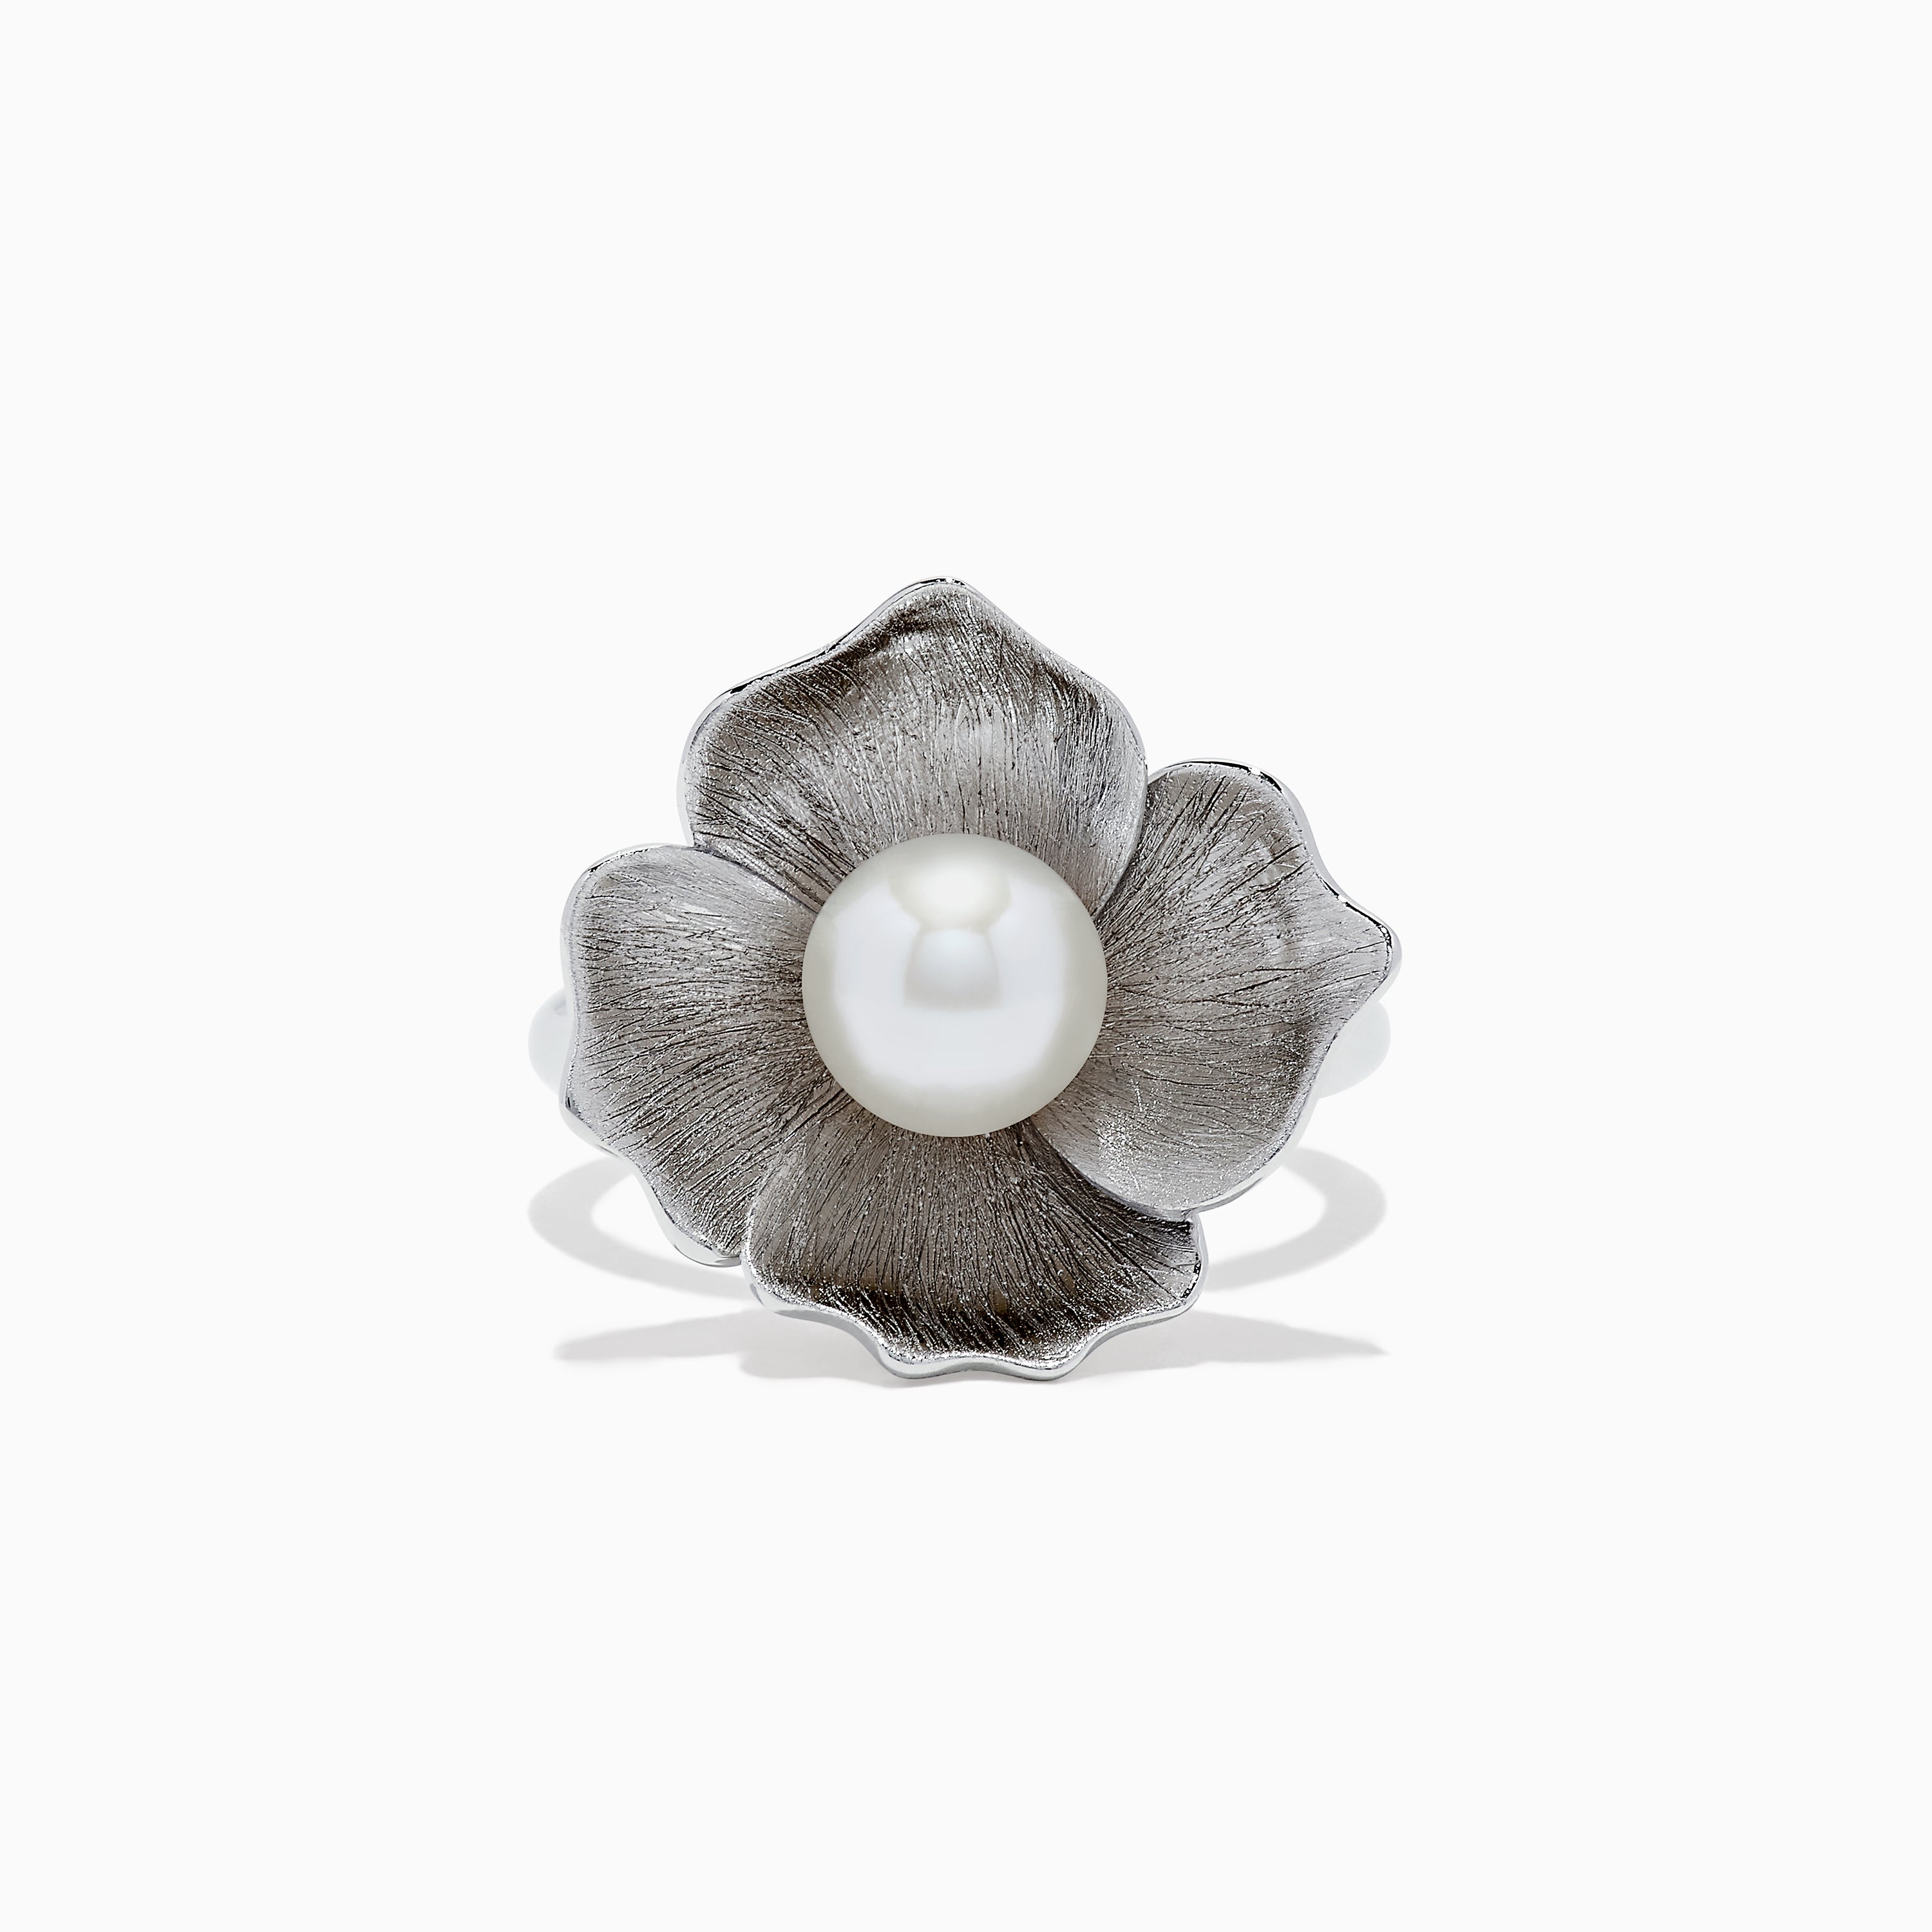  .925 Sterling Silver 10mm Round Filigree Flower Pearl